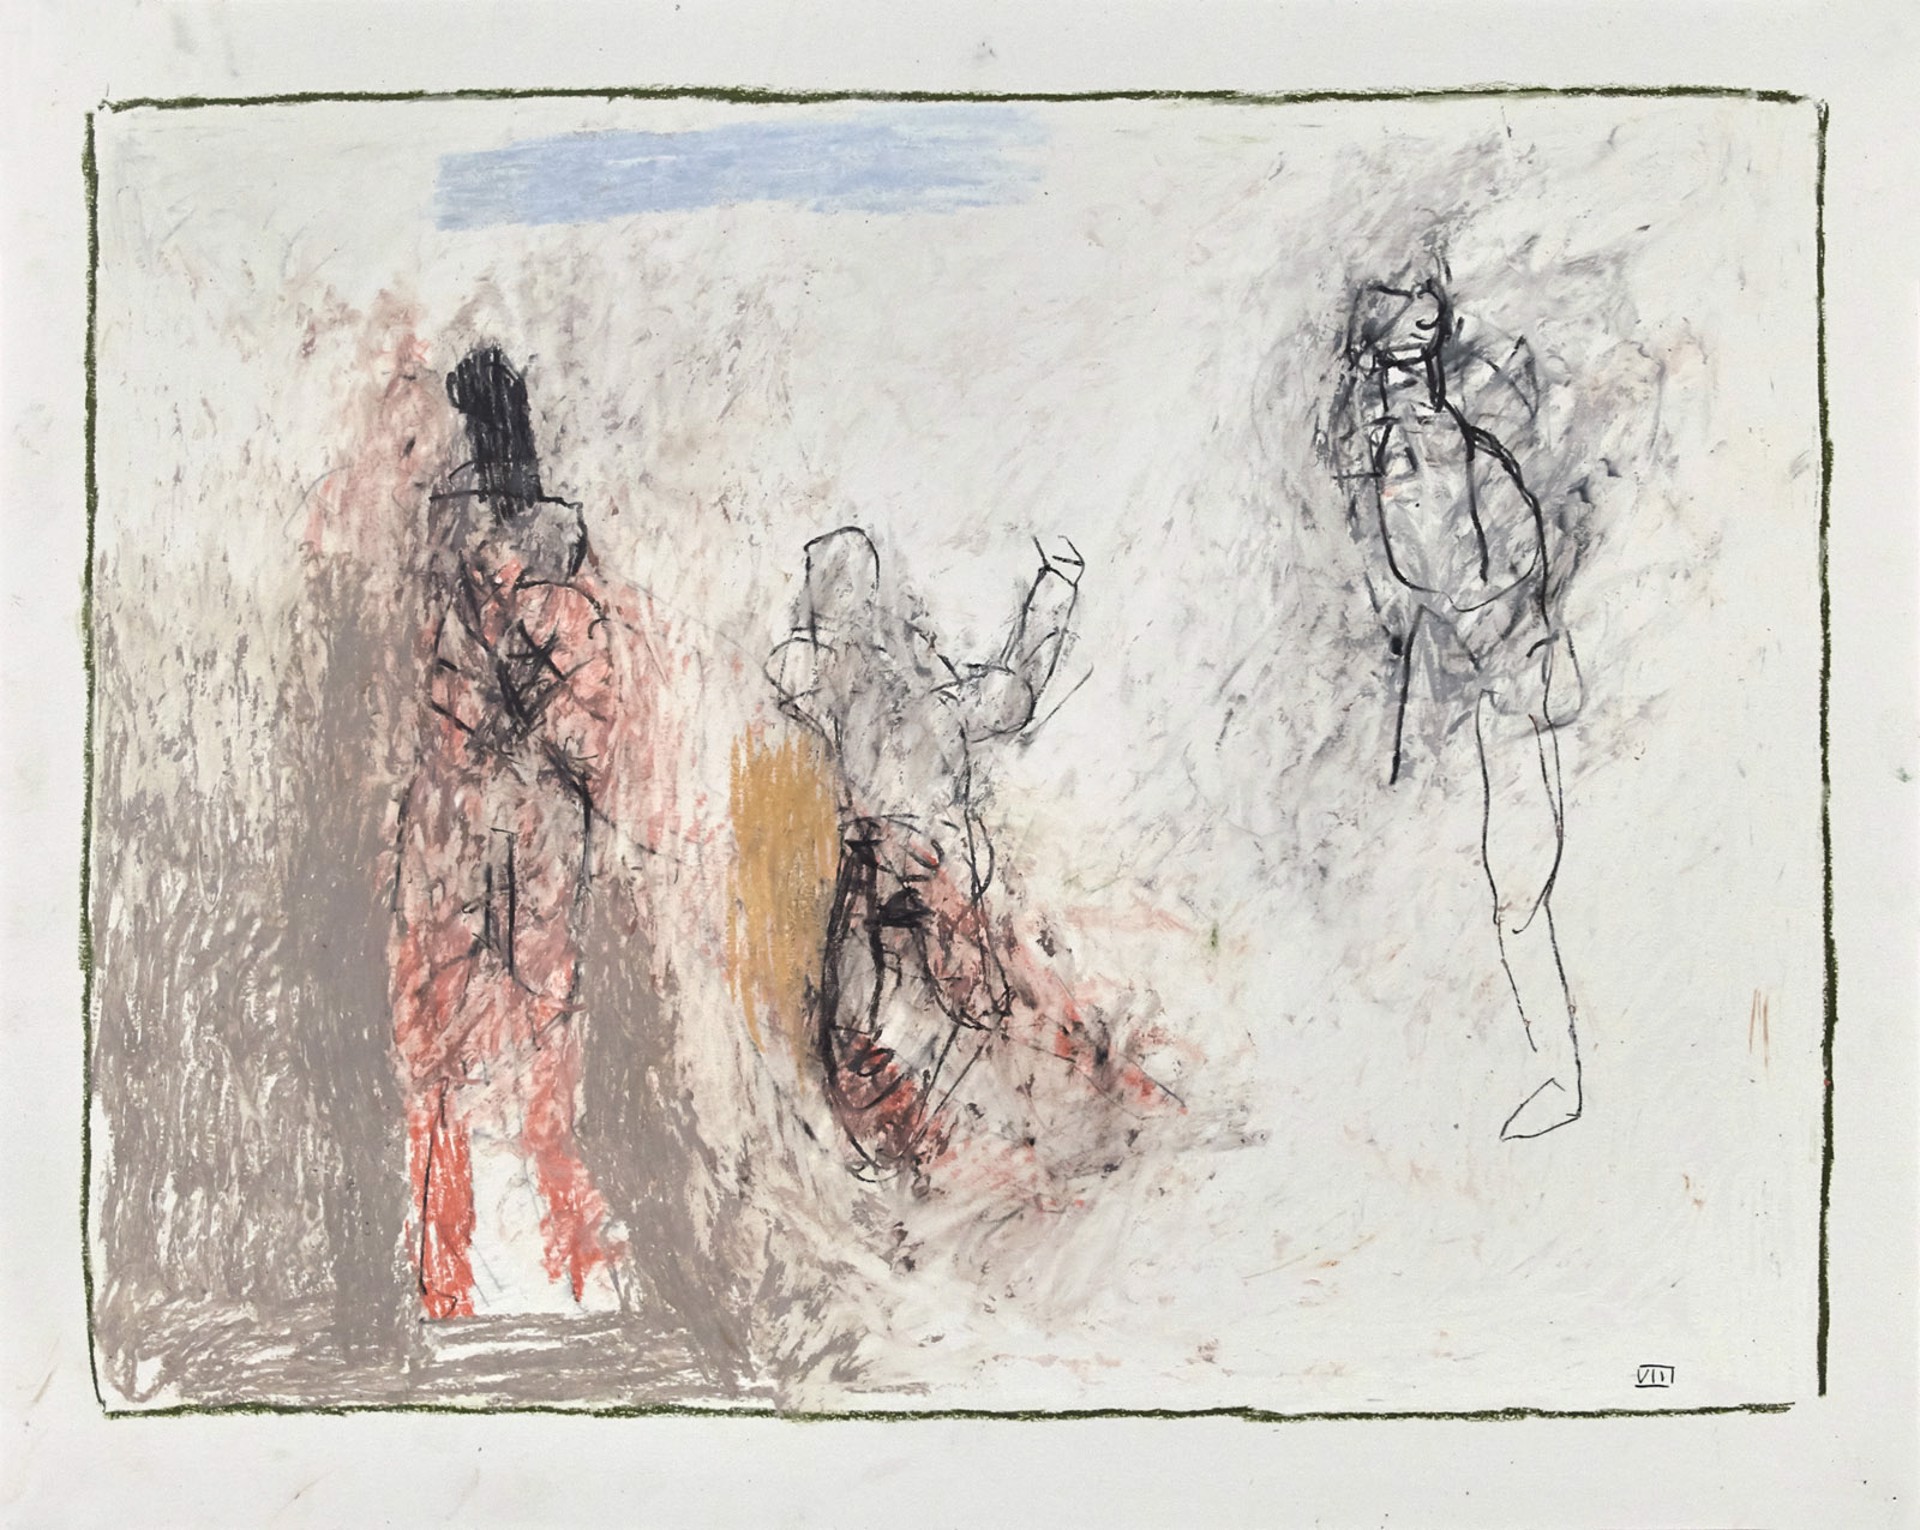 Drawings from Mt Gretna: The Prodigal Son (VIII) by Thaddeus Radell